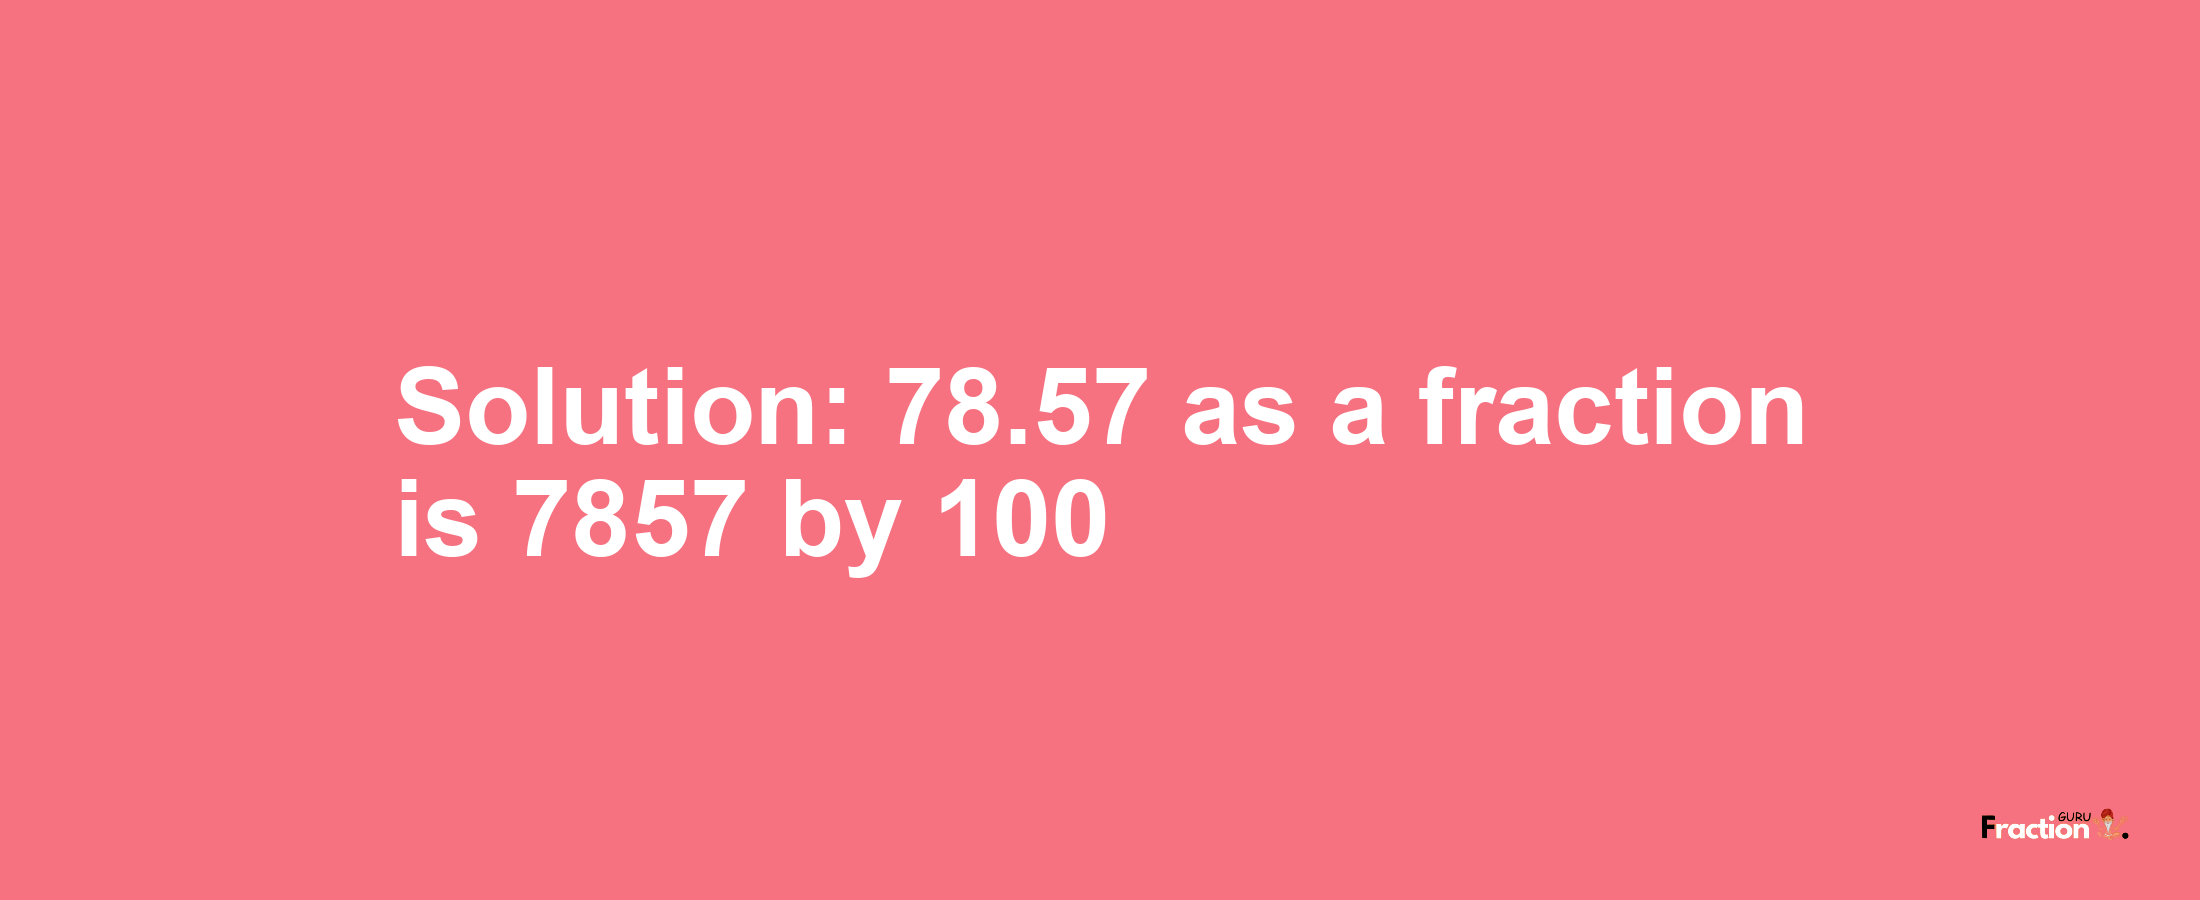 Solution:78.57 as a fraction is 7857/100